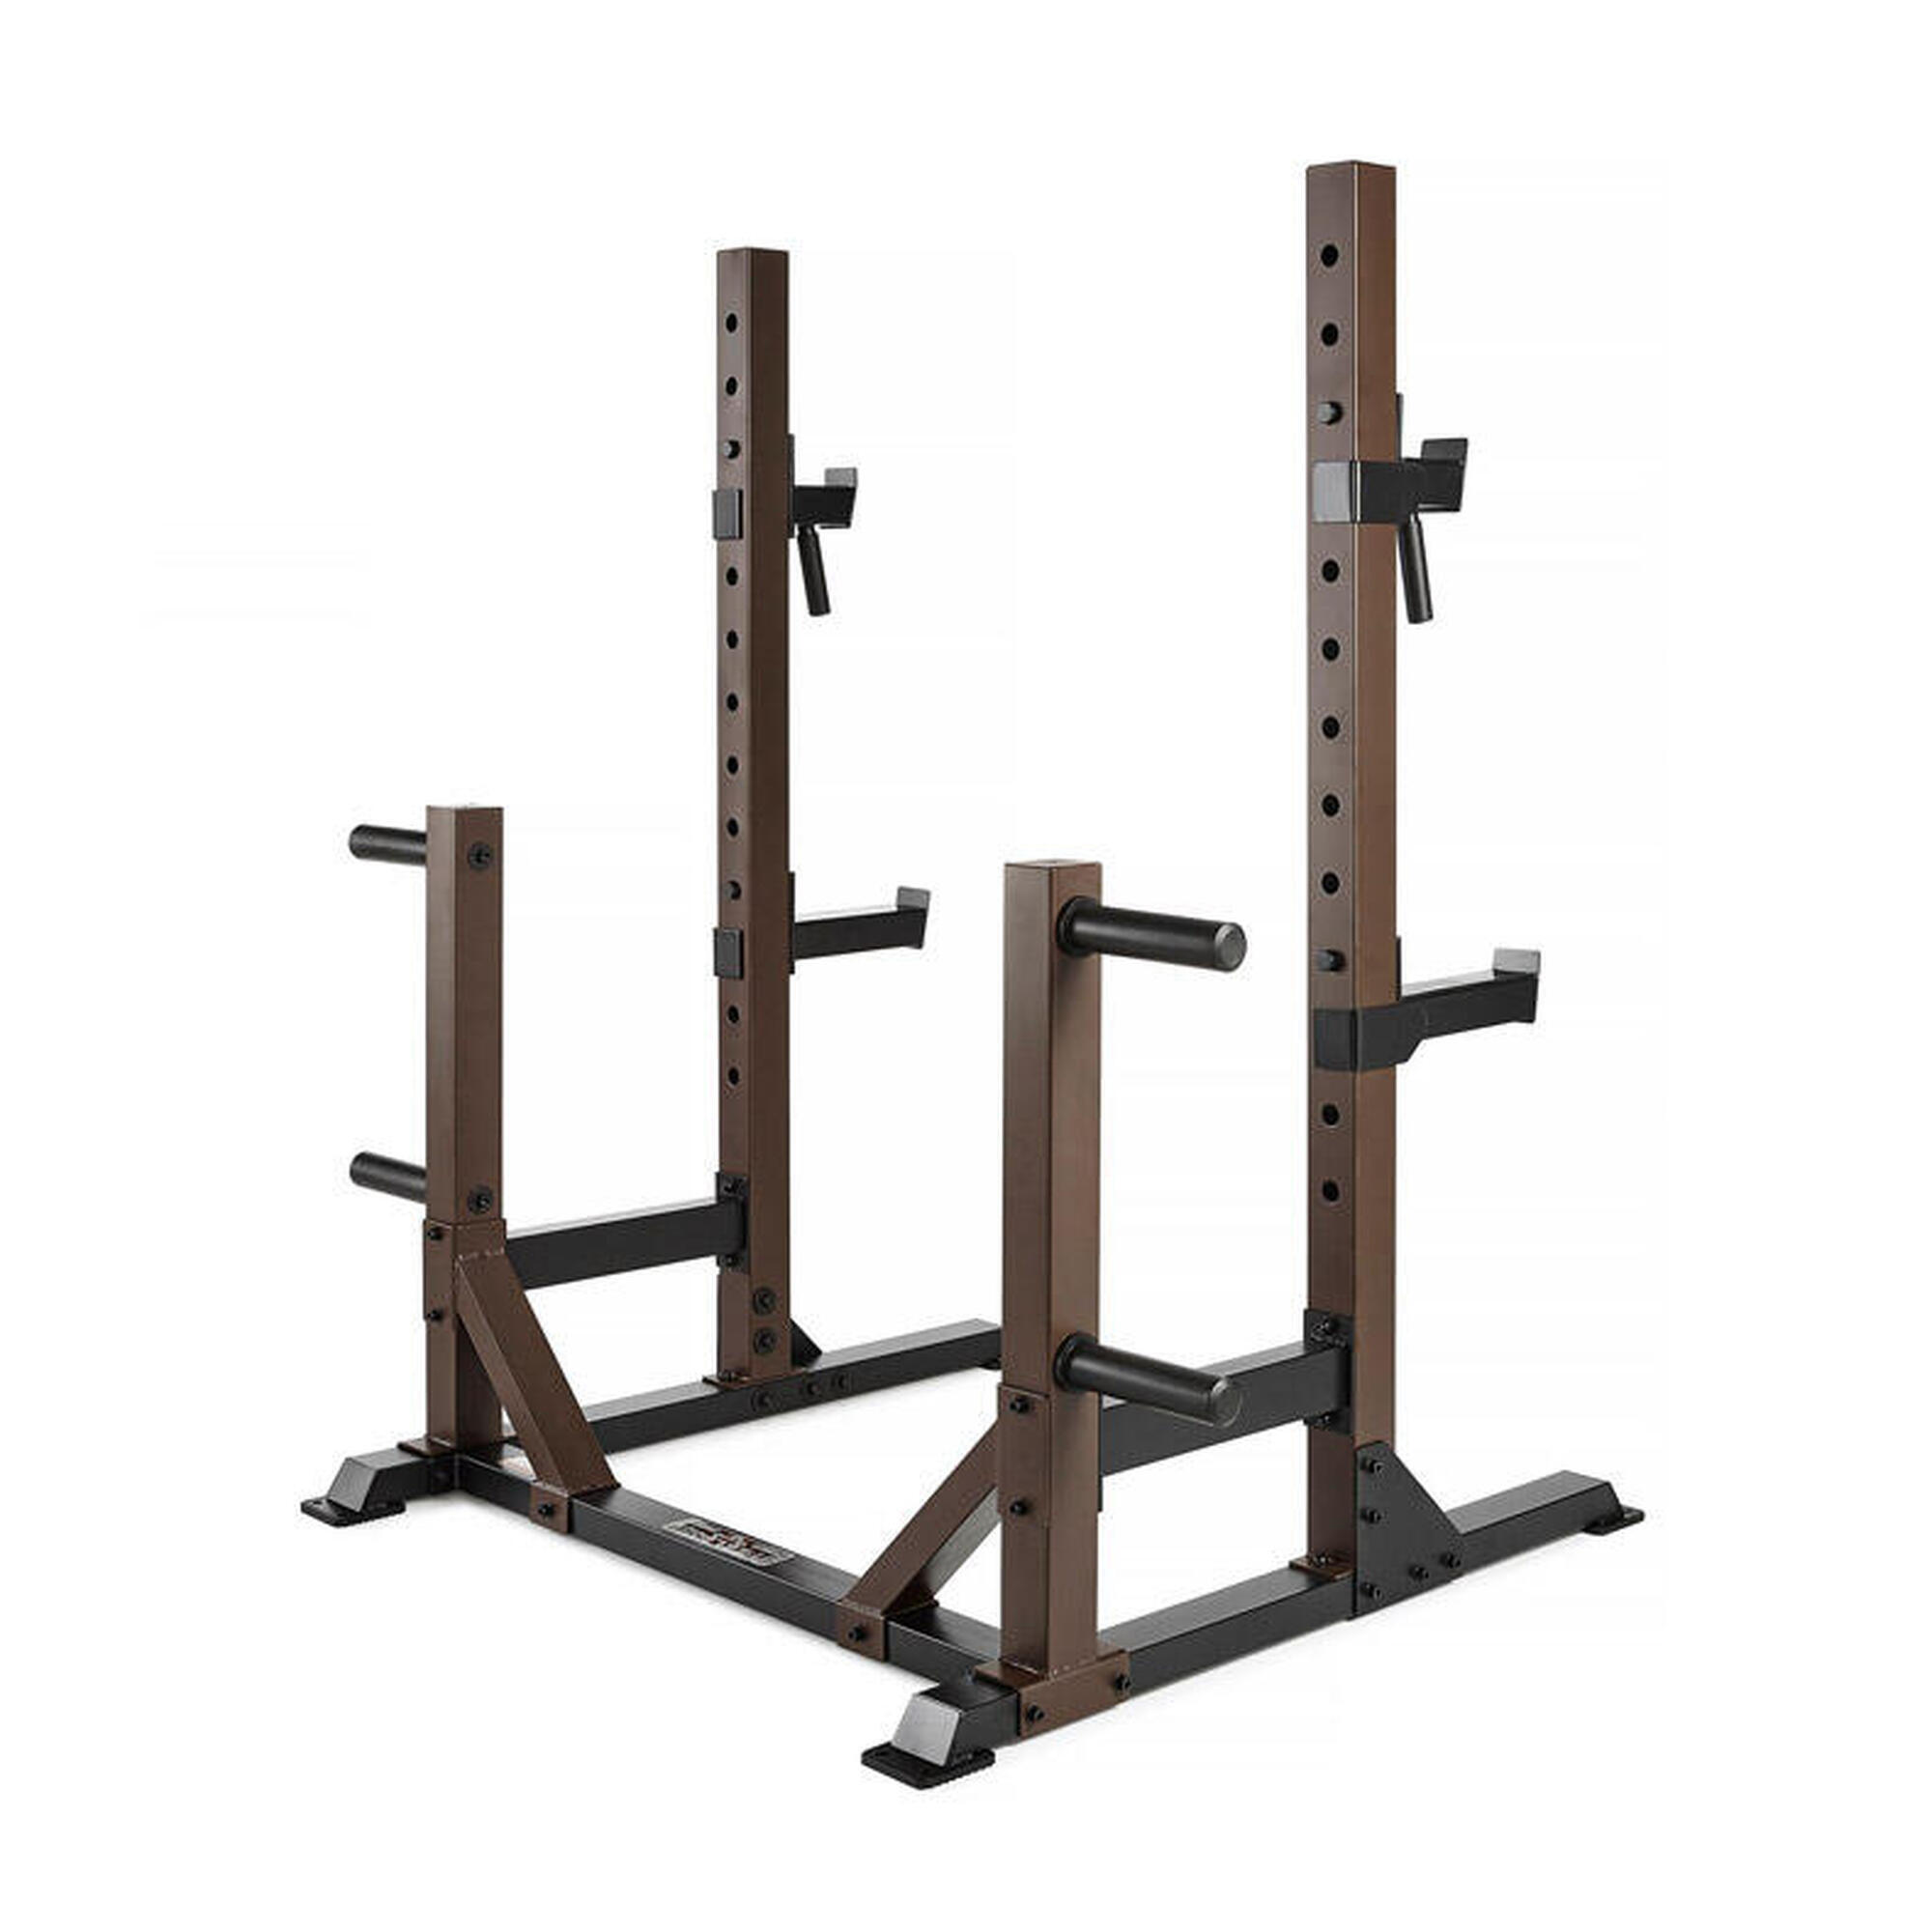 STEELBODY STB-70105 LIGHT COMMERCIAL SQUAT RACK & BASE TRAINER 2/7